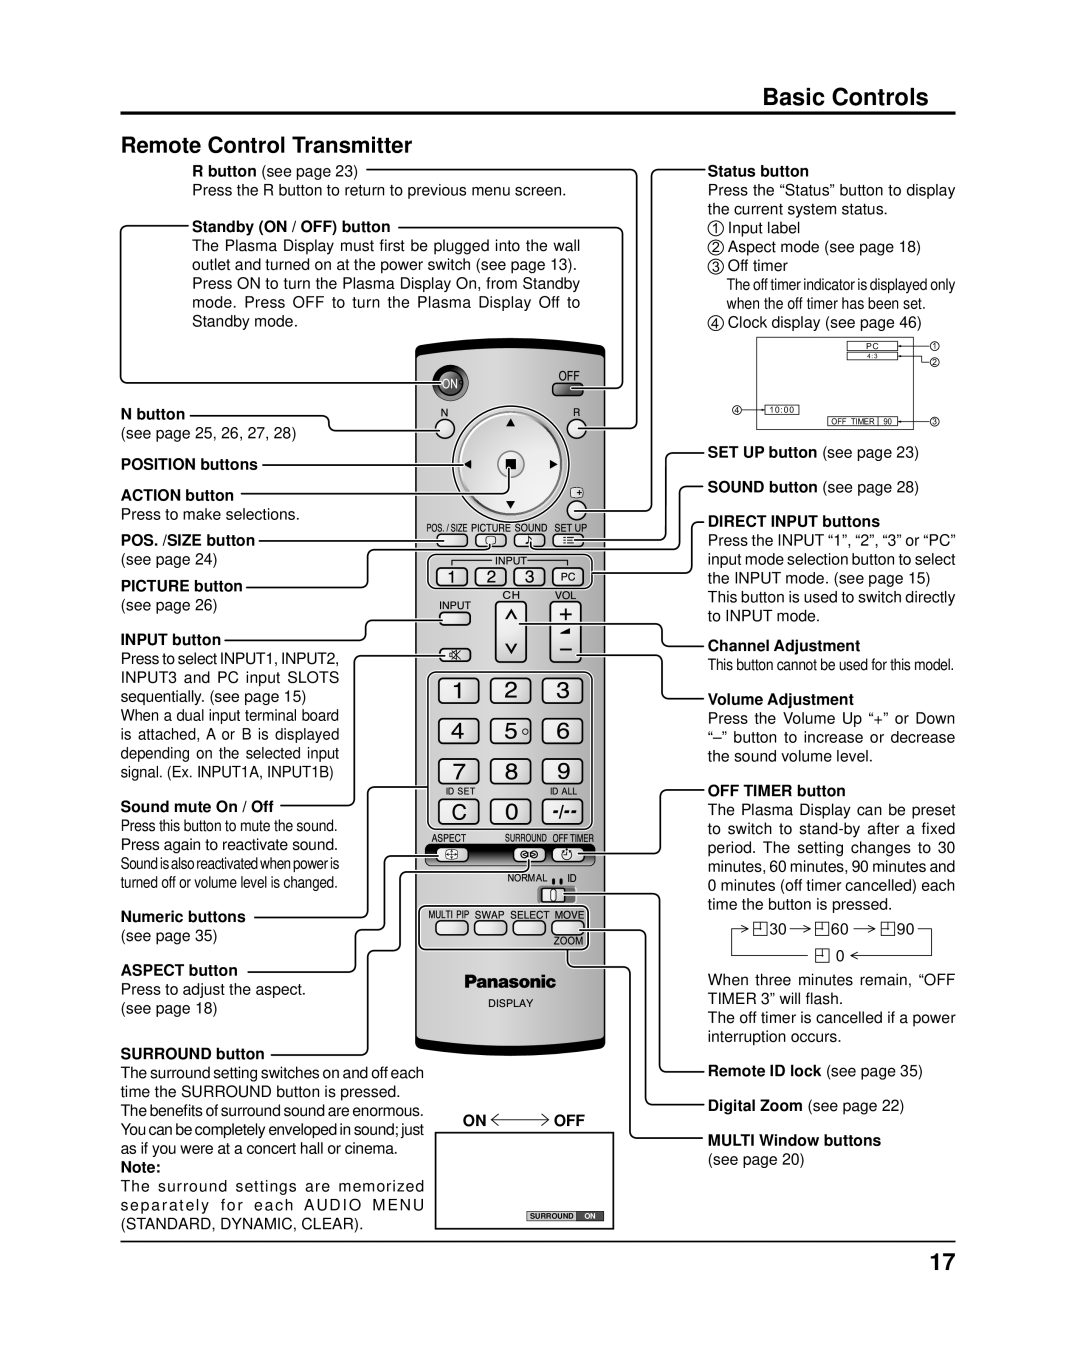 Panasonic TH-58PF11UK Basic Controls, Remote Control Transmitter, Standby ON / OFF button, Status button, N button, On Off 